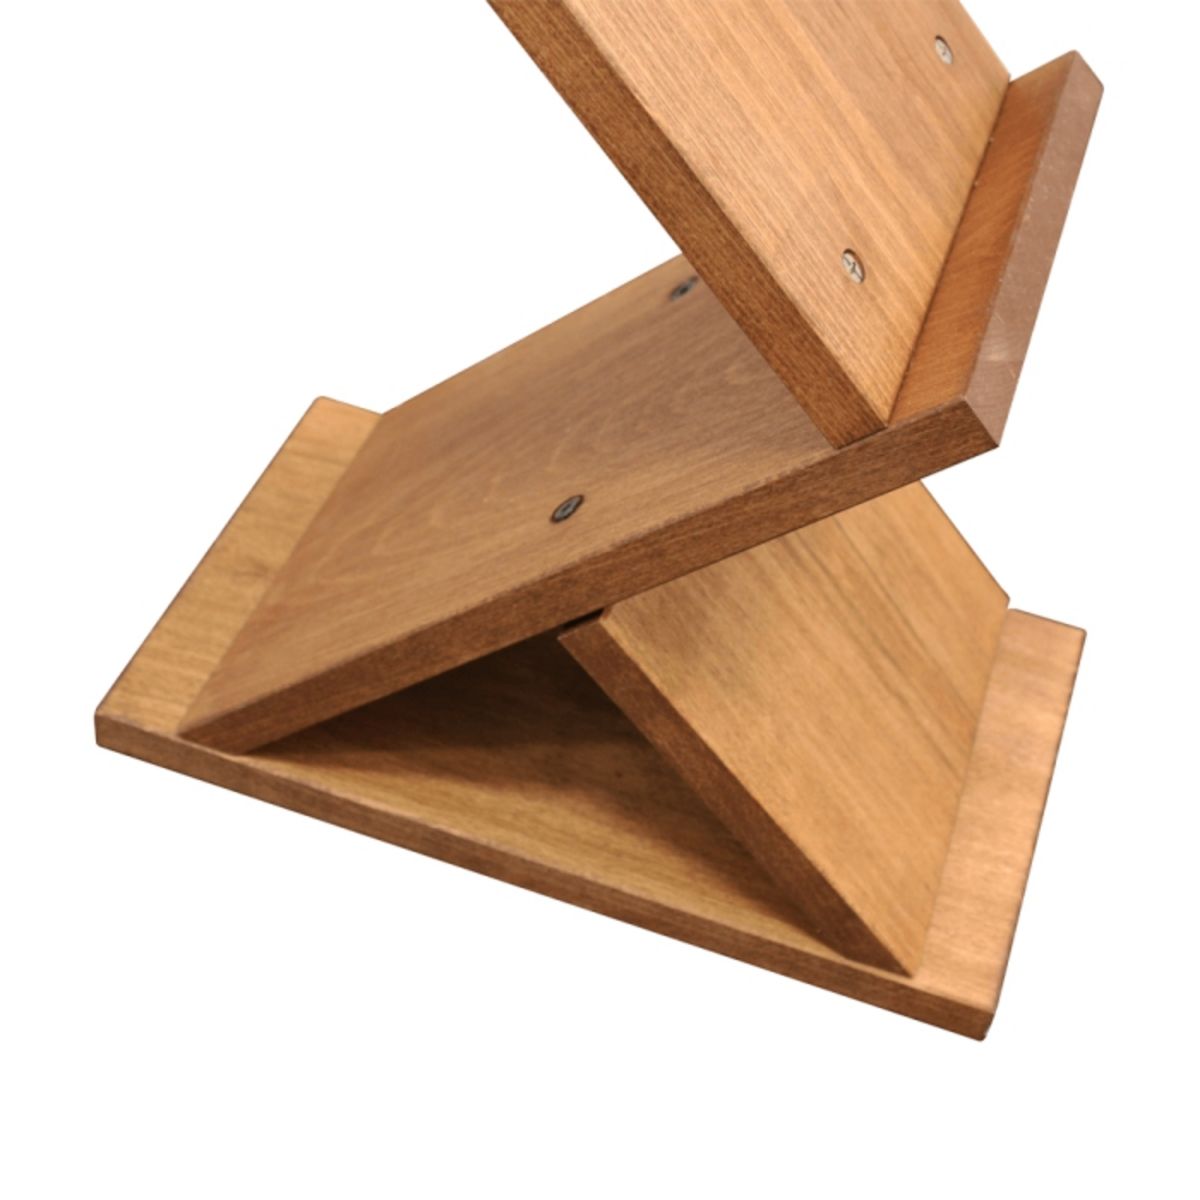 Wooden Zig Zag Display Stand base.png